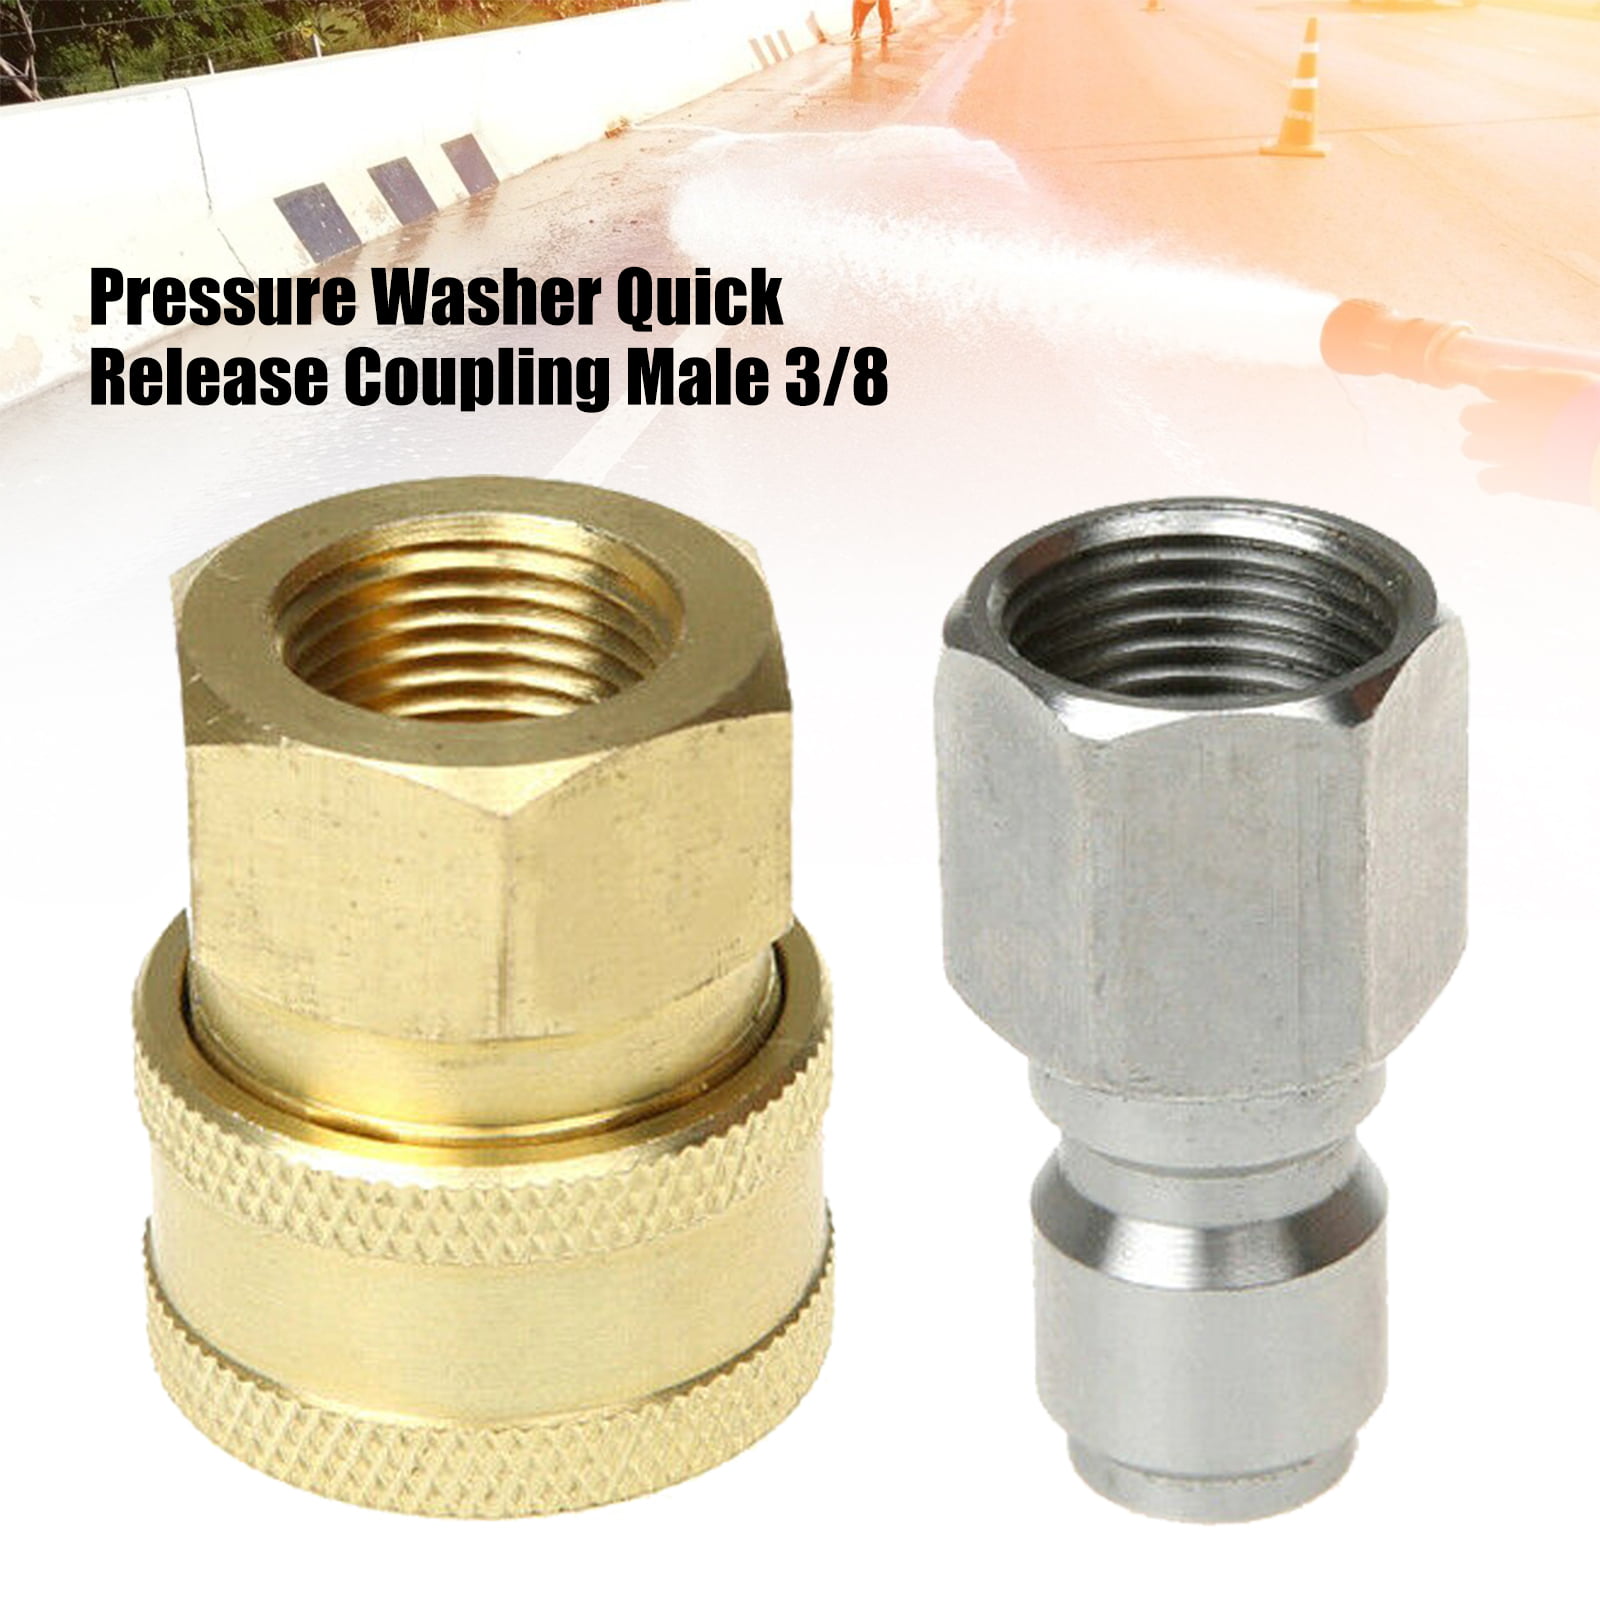 Details about   Pressure Washer Quick Release Coupling Male 3/8" Female Probe Connector 